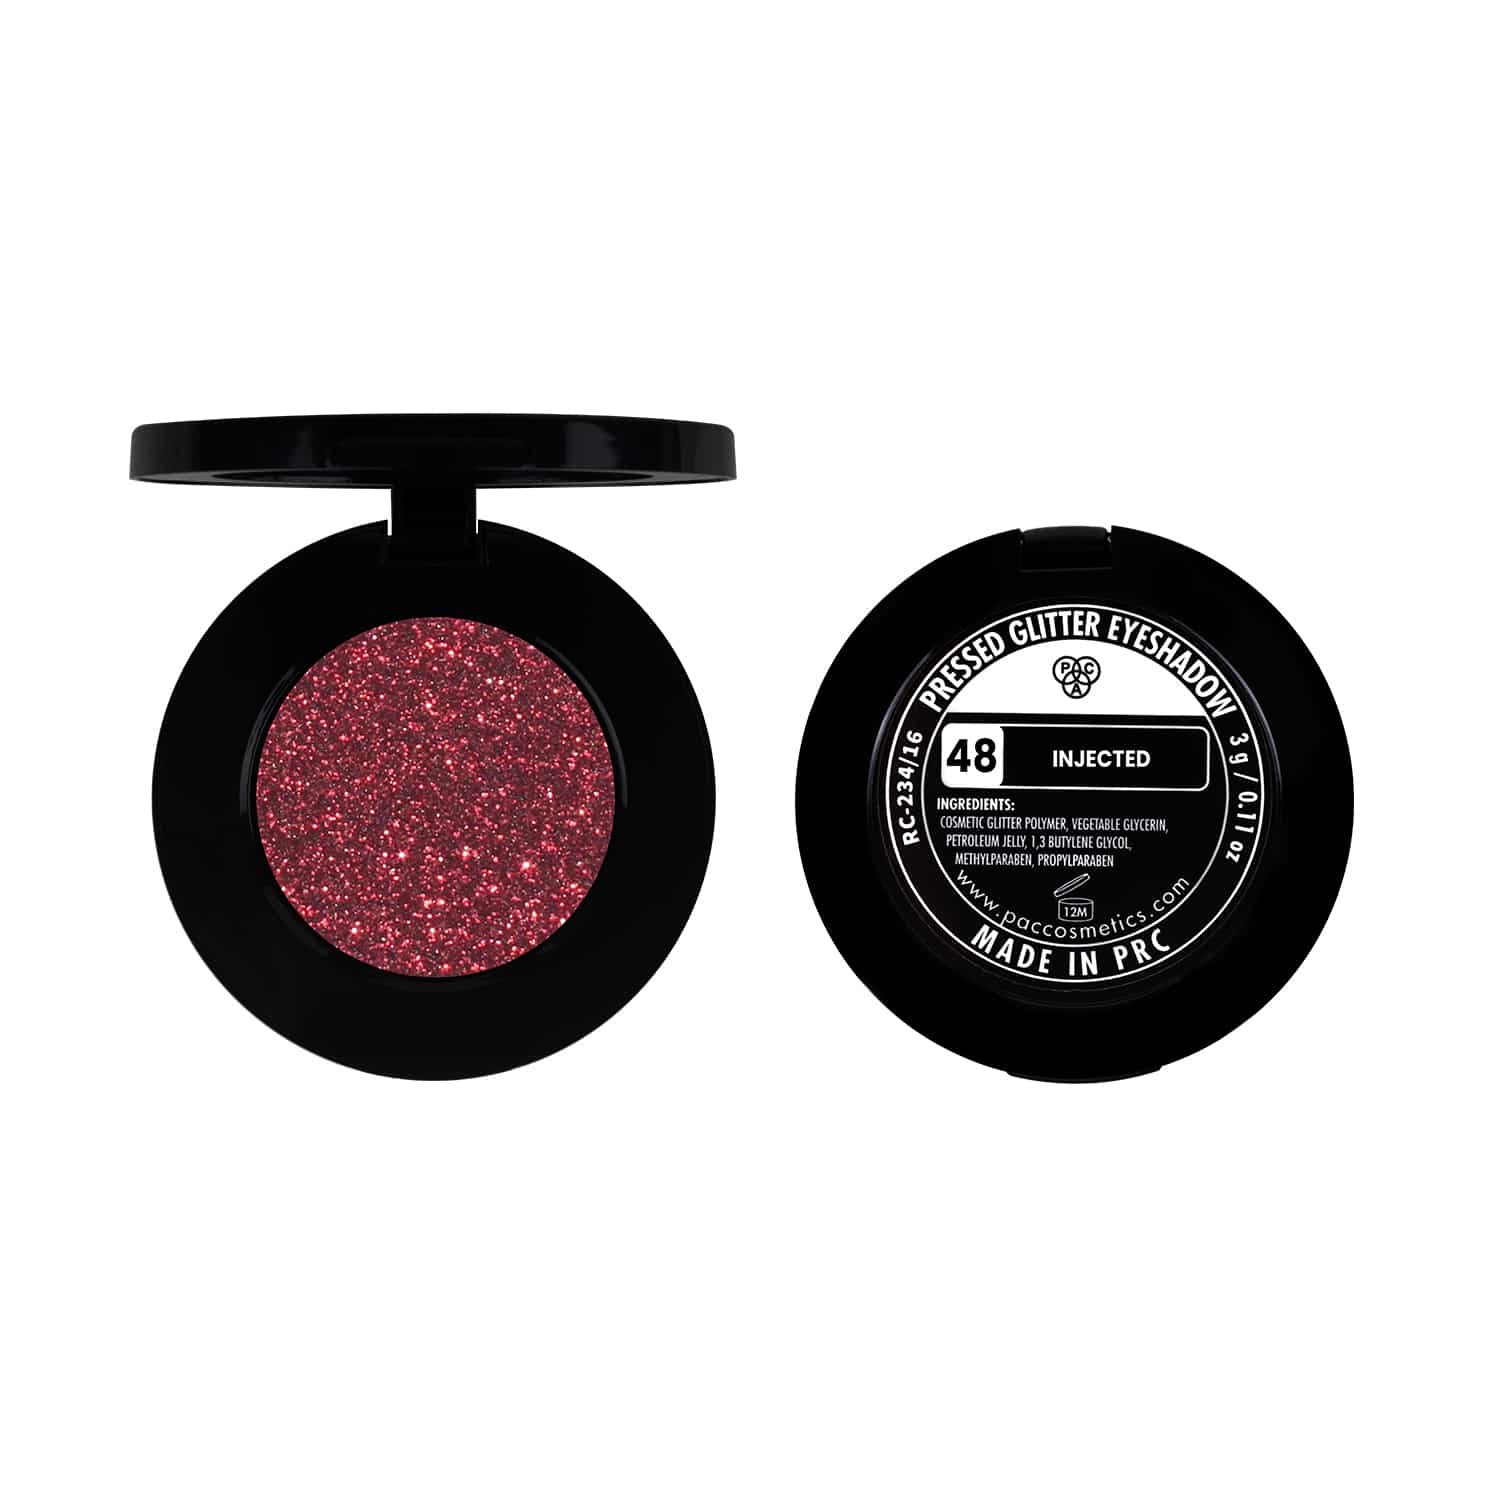 PAC Pressed Glitter Eyeshadow - 48 (Injected) PAC